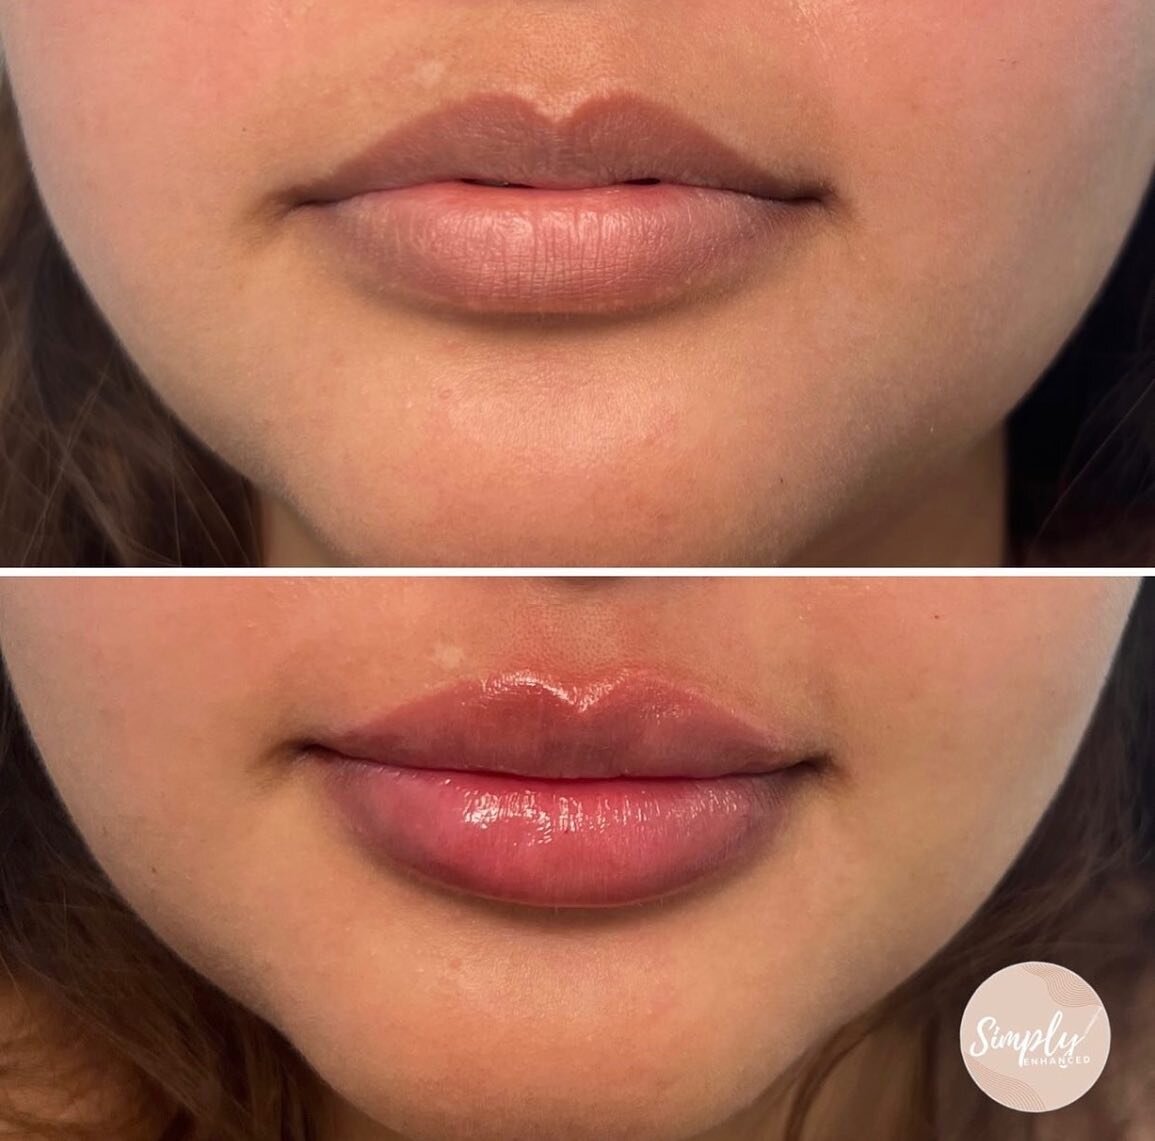 Kelly working her magic 💉

Simply enhancing her clients natural lips 👄 

For the month of May, receive $25 off your treatment with Kelly! 
Visit her IG to book ✨
@simply.enhanced 
&bull;
&bull;
&bull;
&bull;
#lipfillermelbourne #melbournecosmeticnu